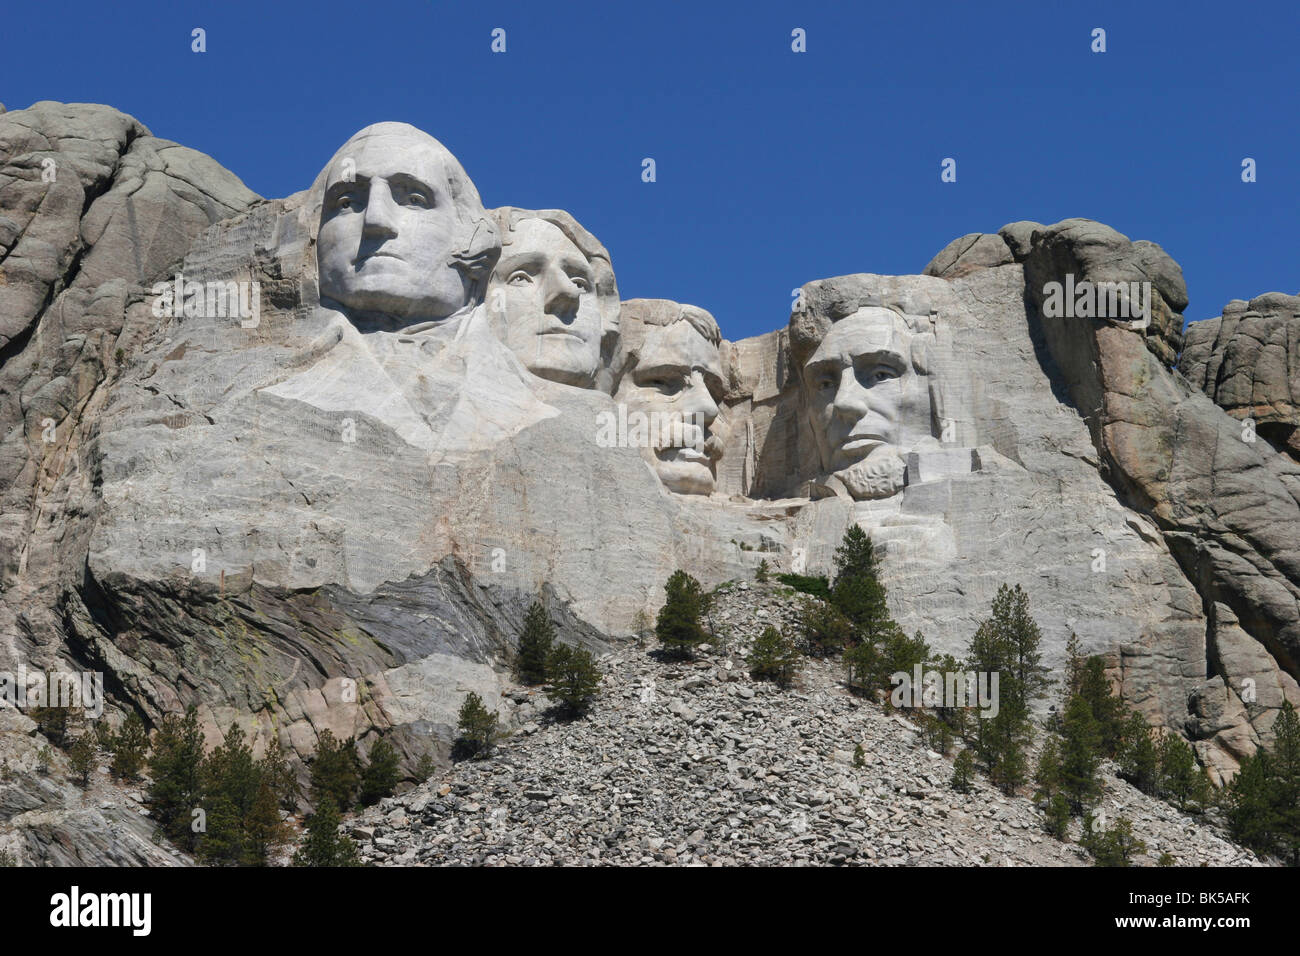 Low angle view of the sculptures of former US presidents, Mt Rushmore National Monument, Black Hills, South Dakota, USA Stock Photo